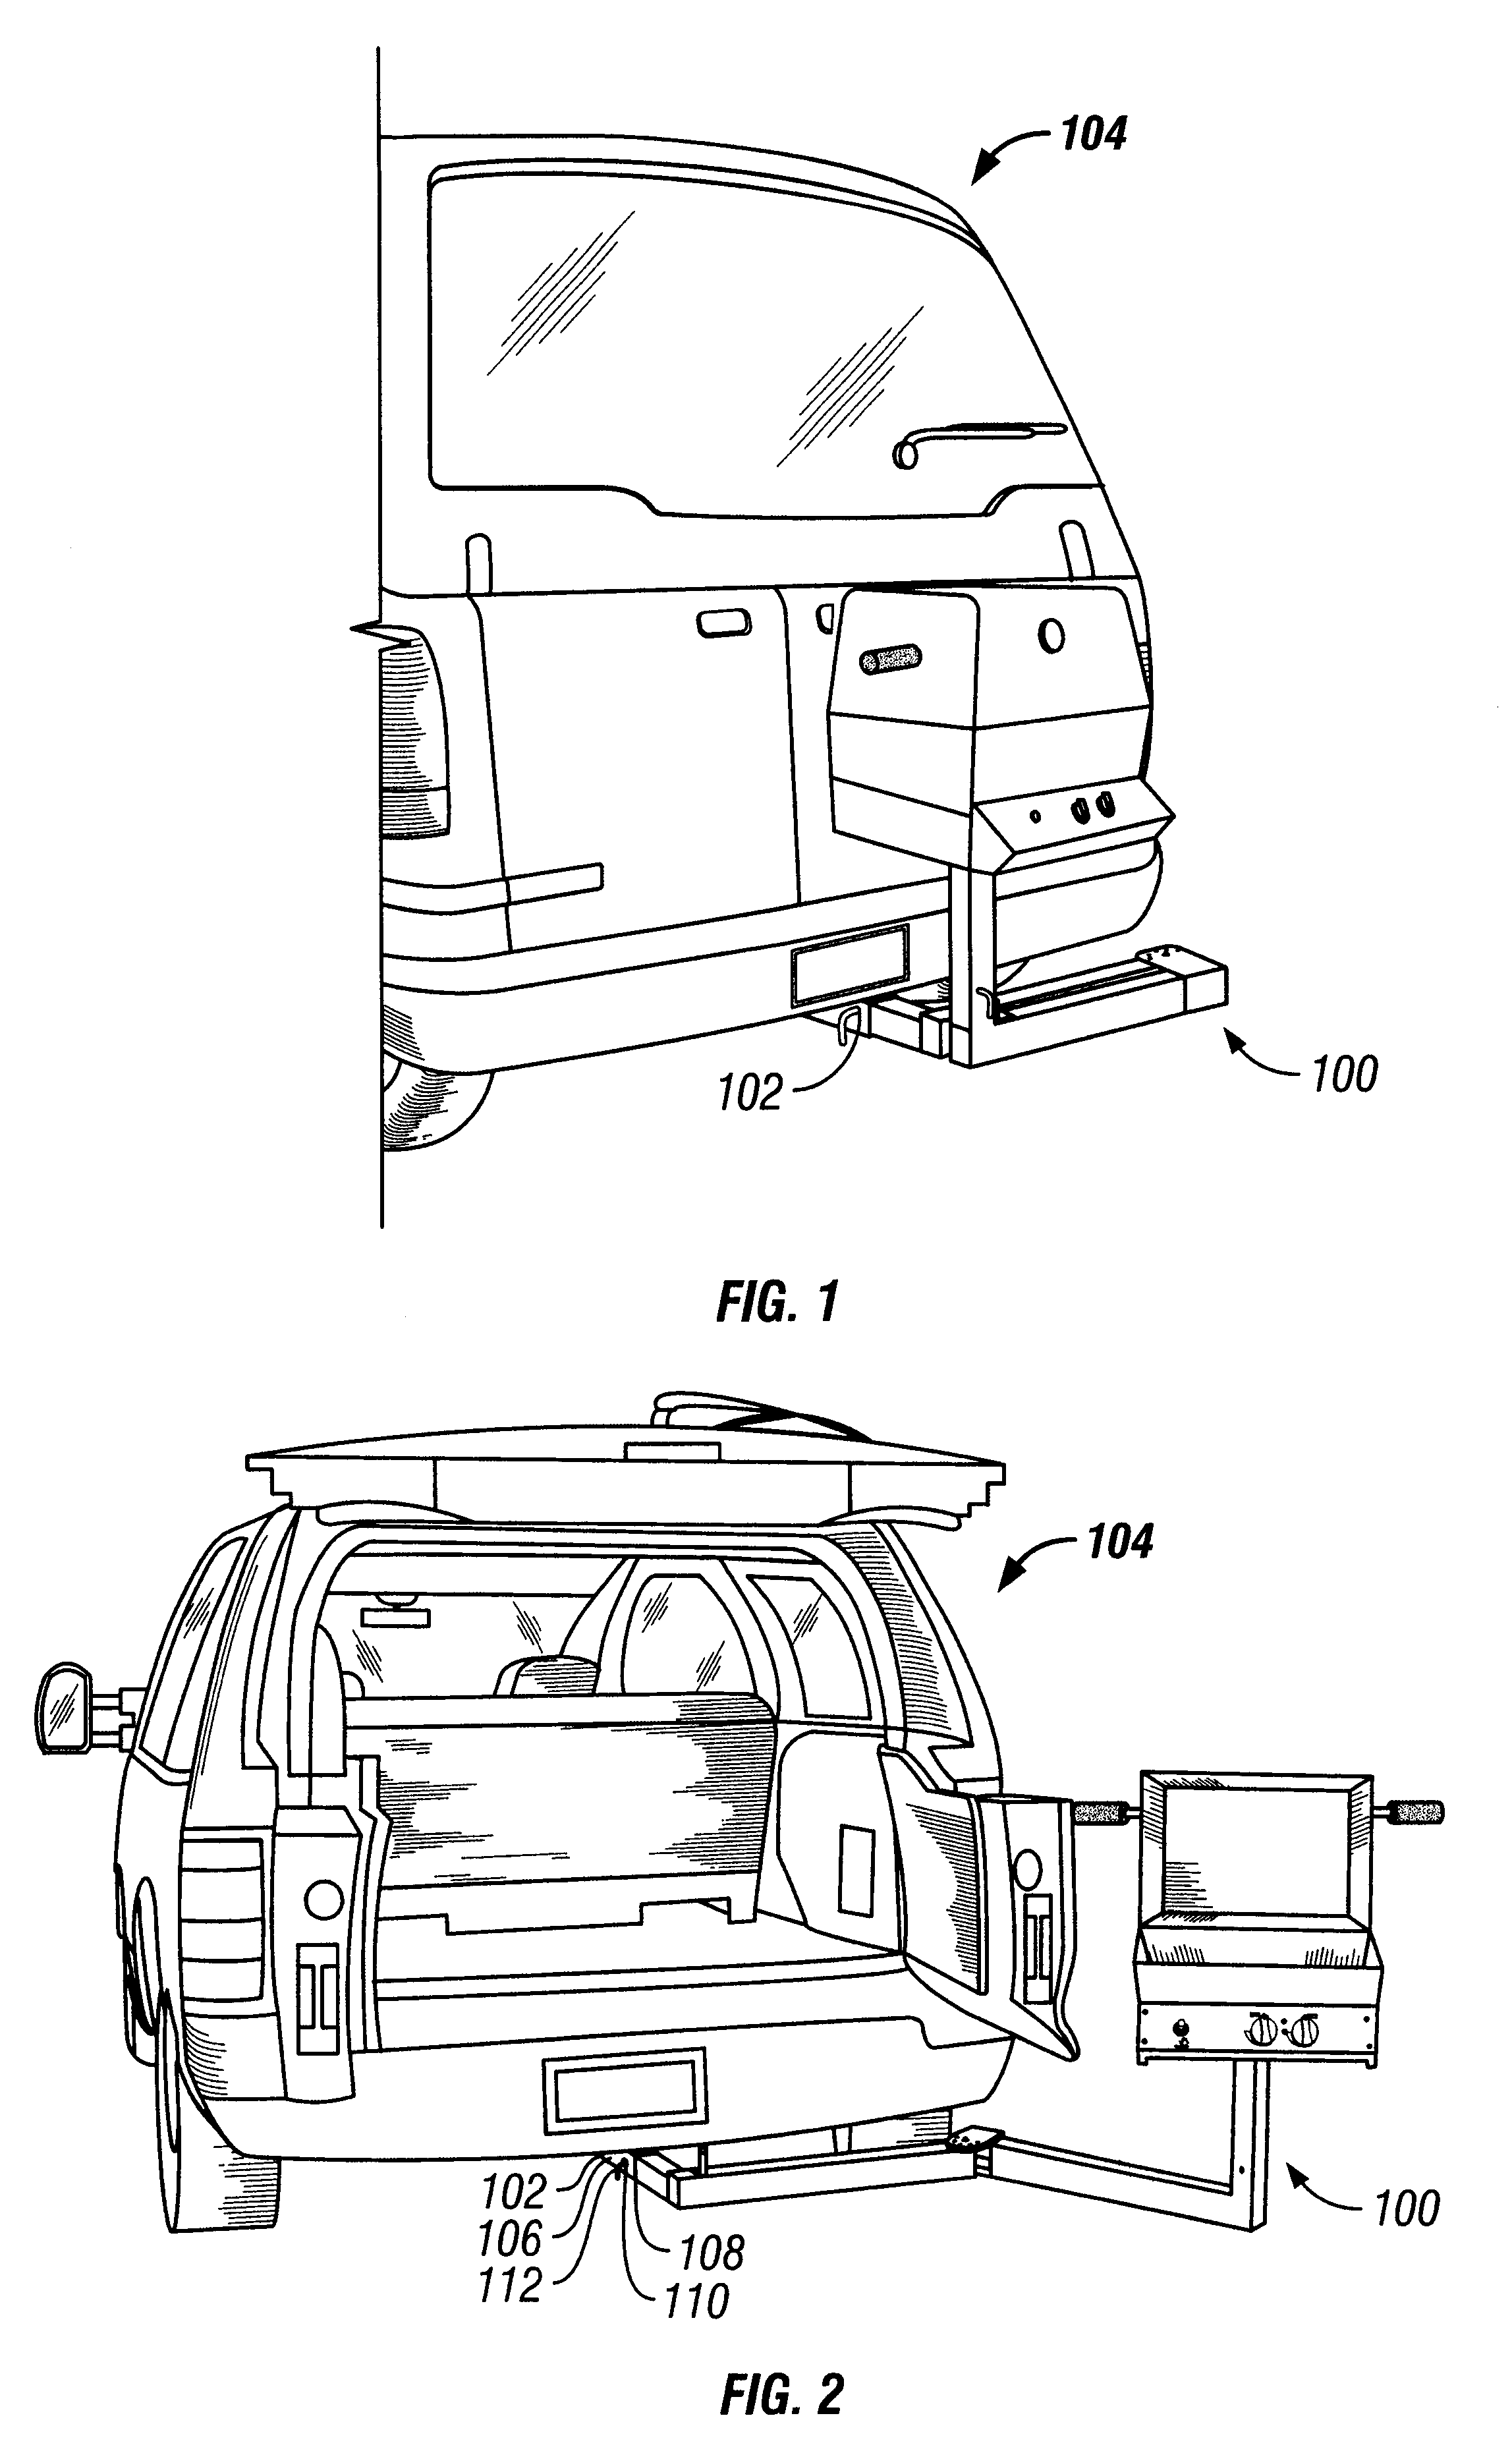 Swingable apparatus attachable to a vehicle for transporting a cooking device and permitting access to the vehicle